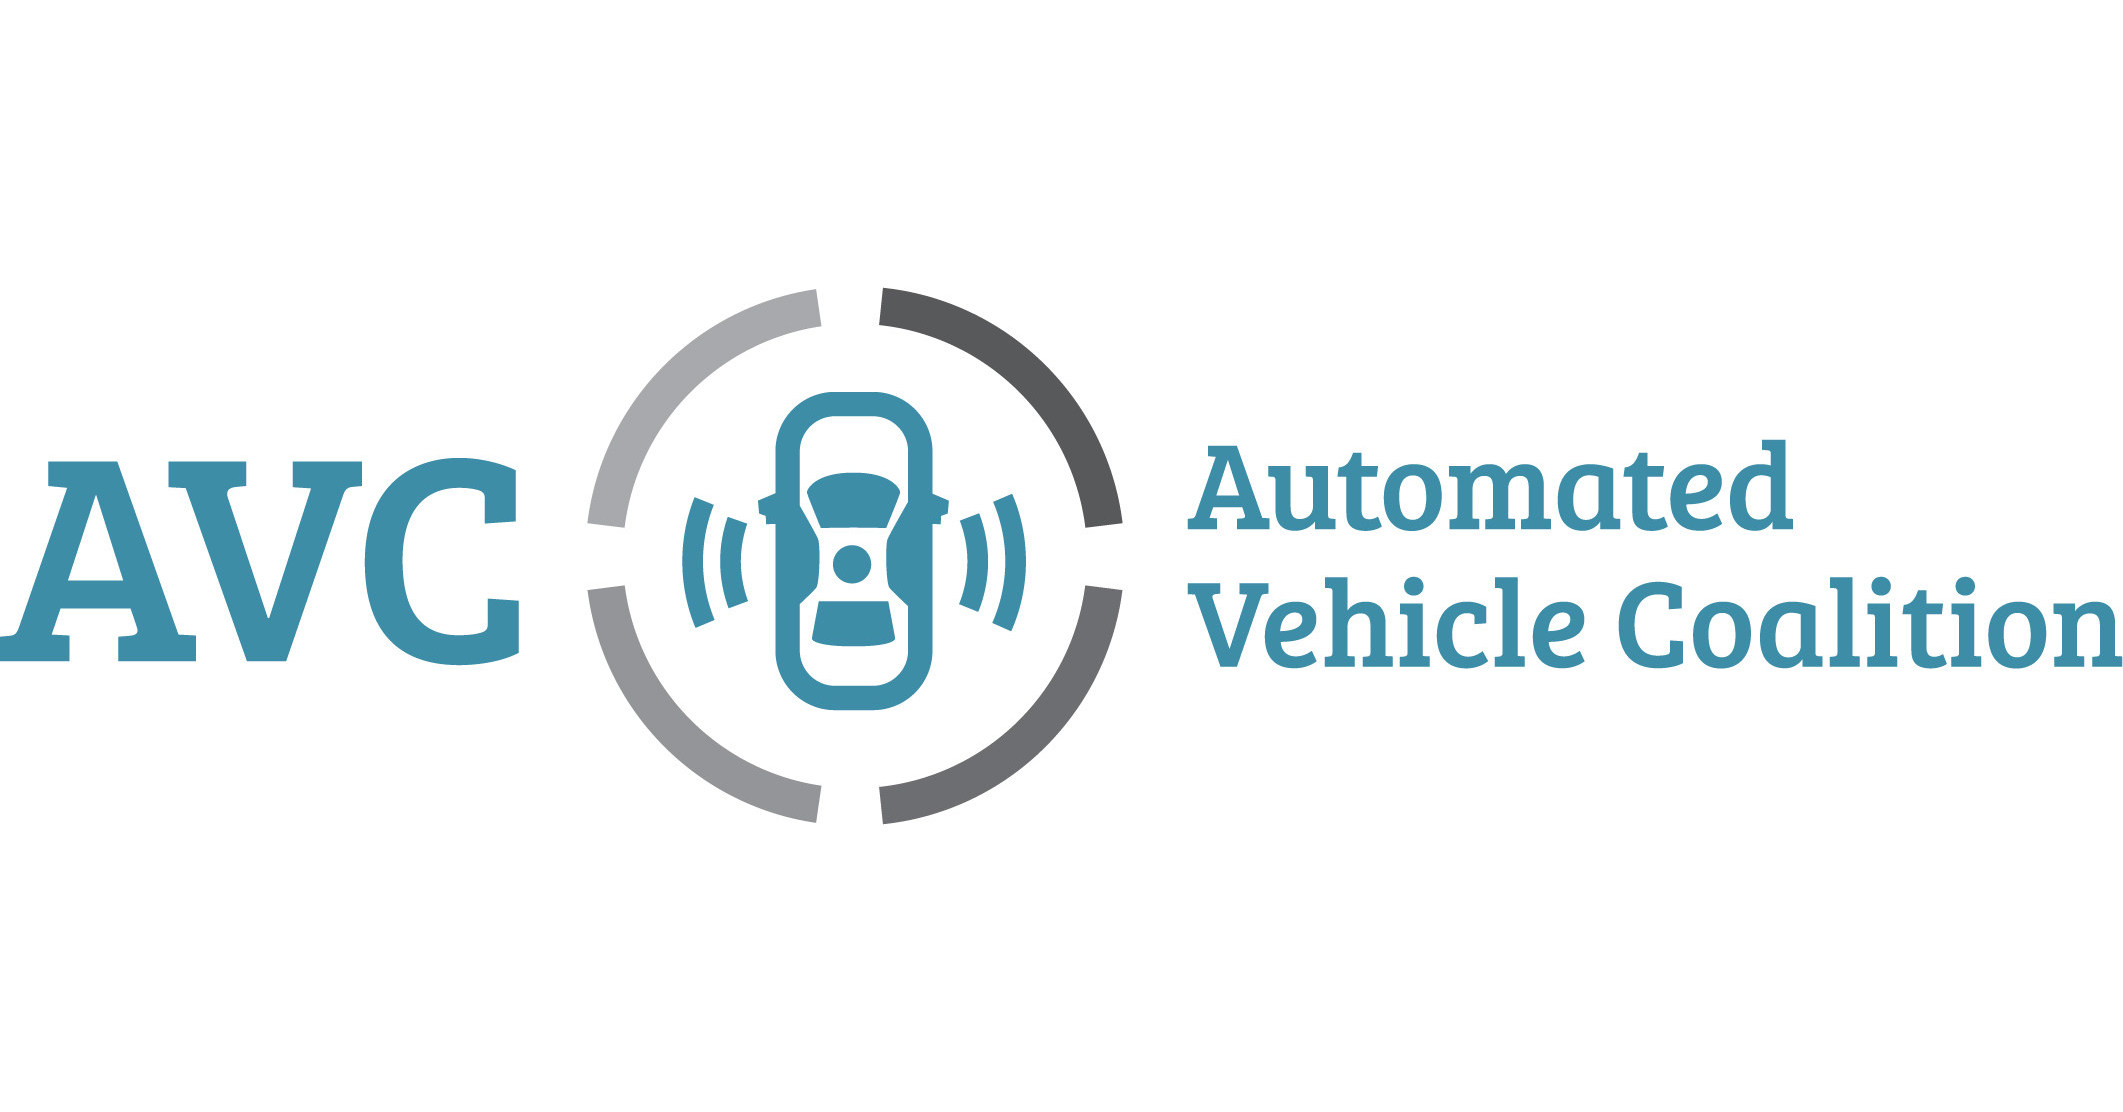 Automated Vehicle Coalition Forms, Promoting Safety, Innovation, and